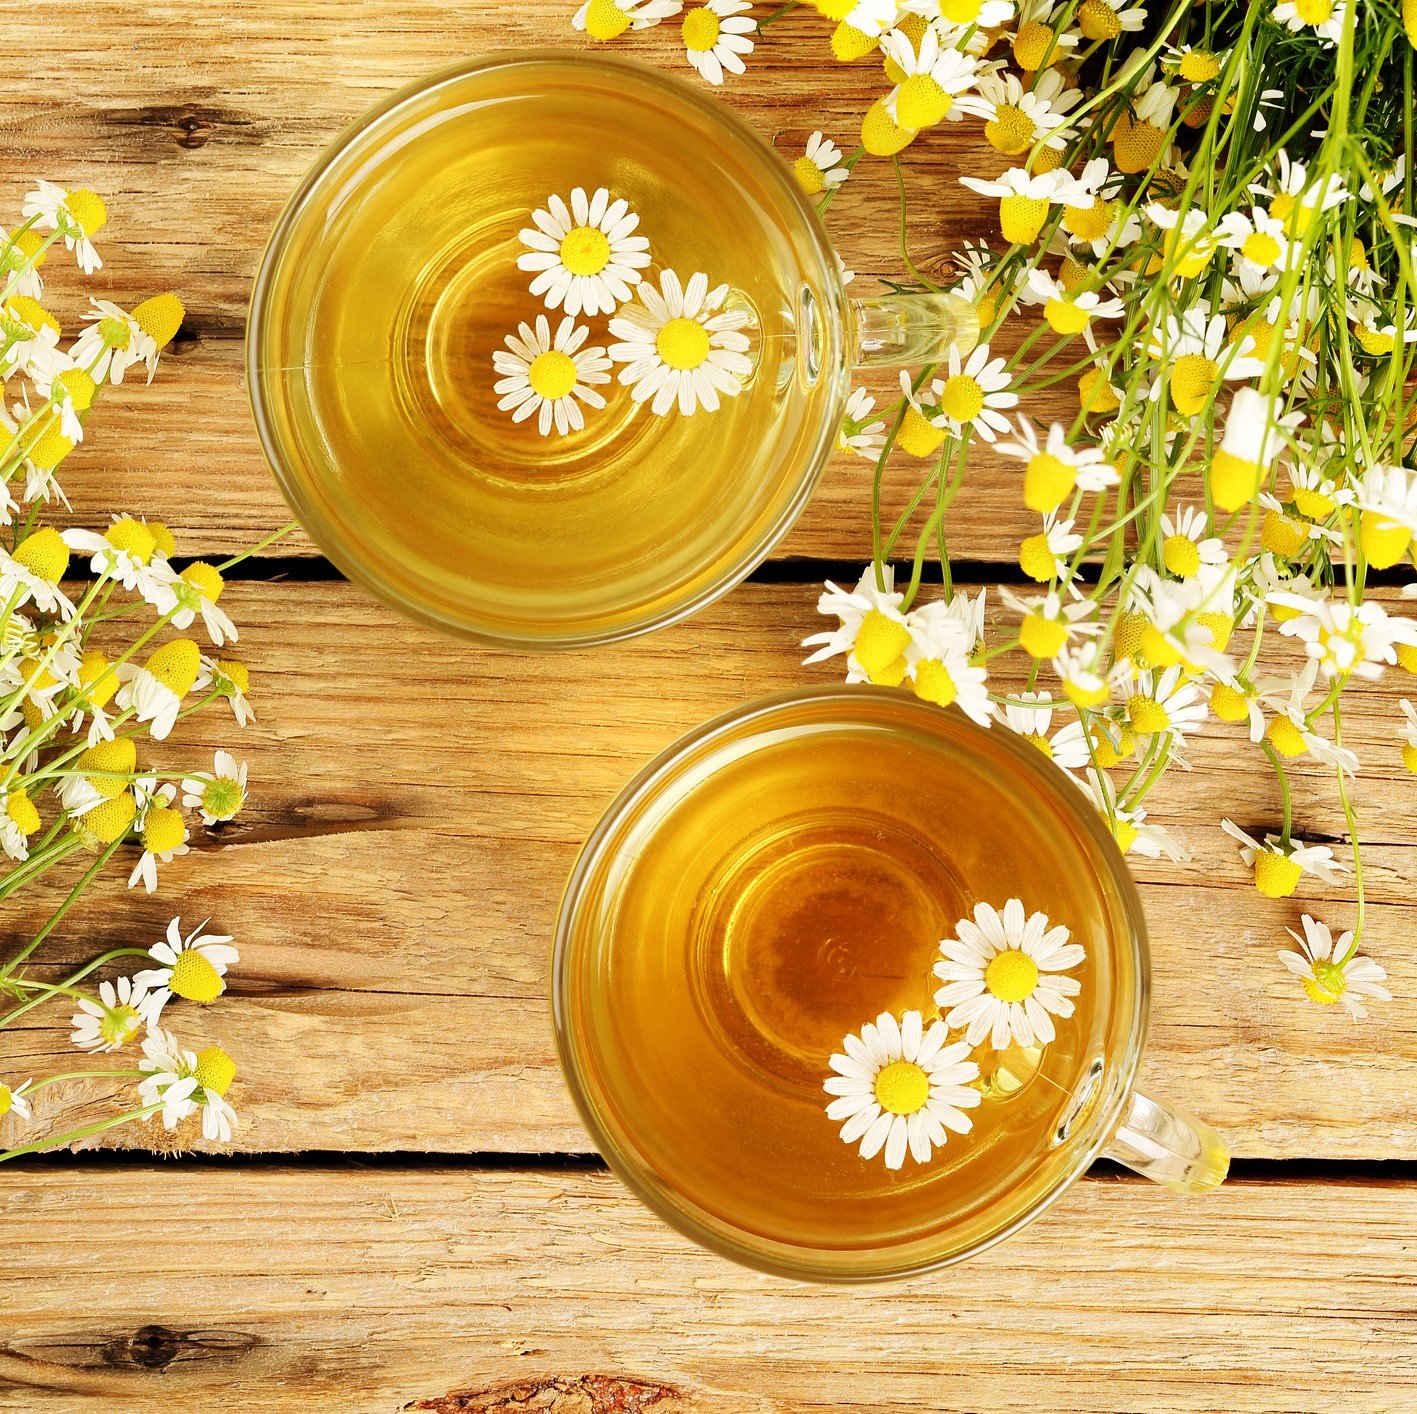 Chamomile tea is a fantastic stress-reliever and great sleep aid thanks to its calming properties. (iStock Photo)